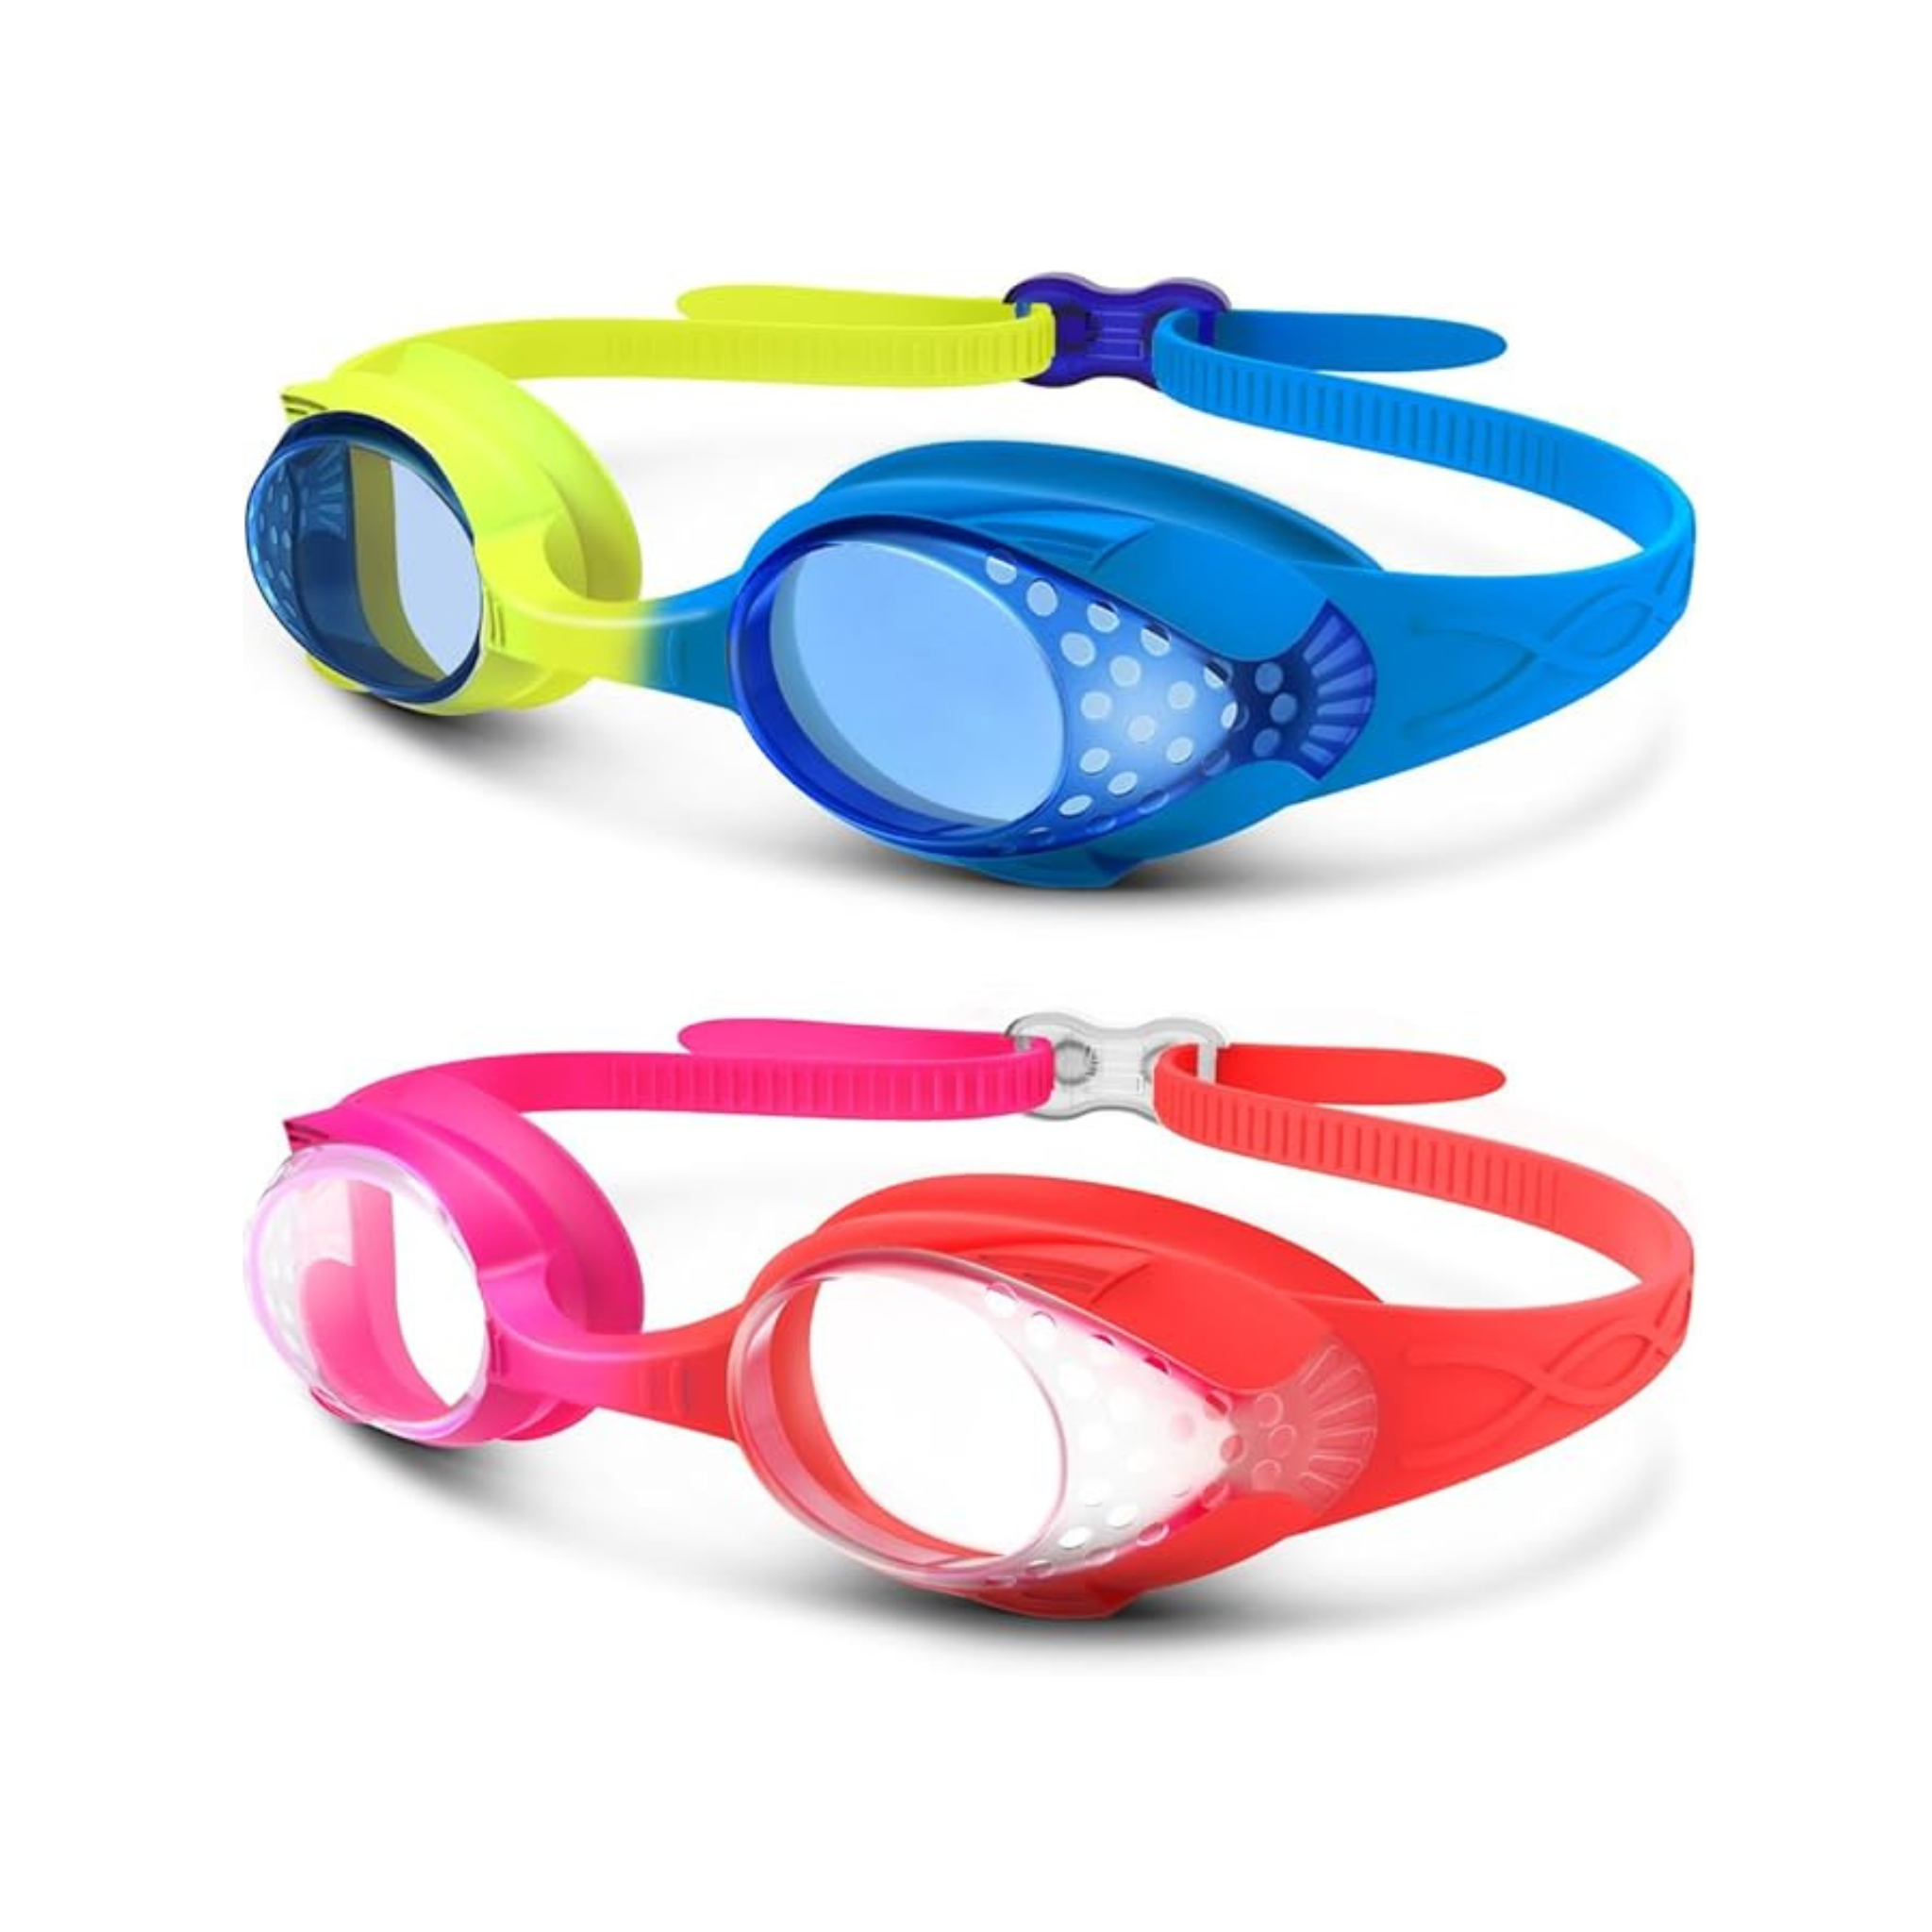 OutdoorMaster Kids Swim Goggles 2 Pack (choose from 6 color combos)